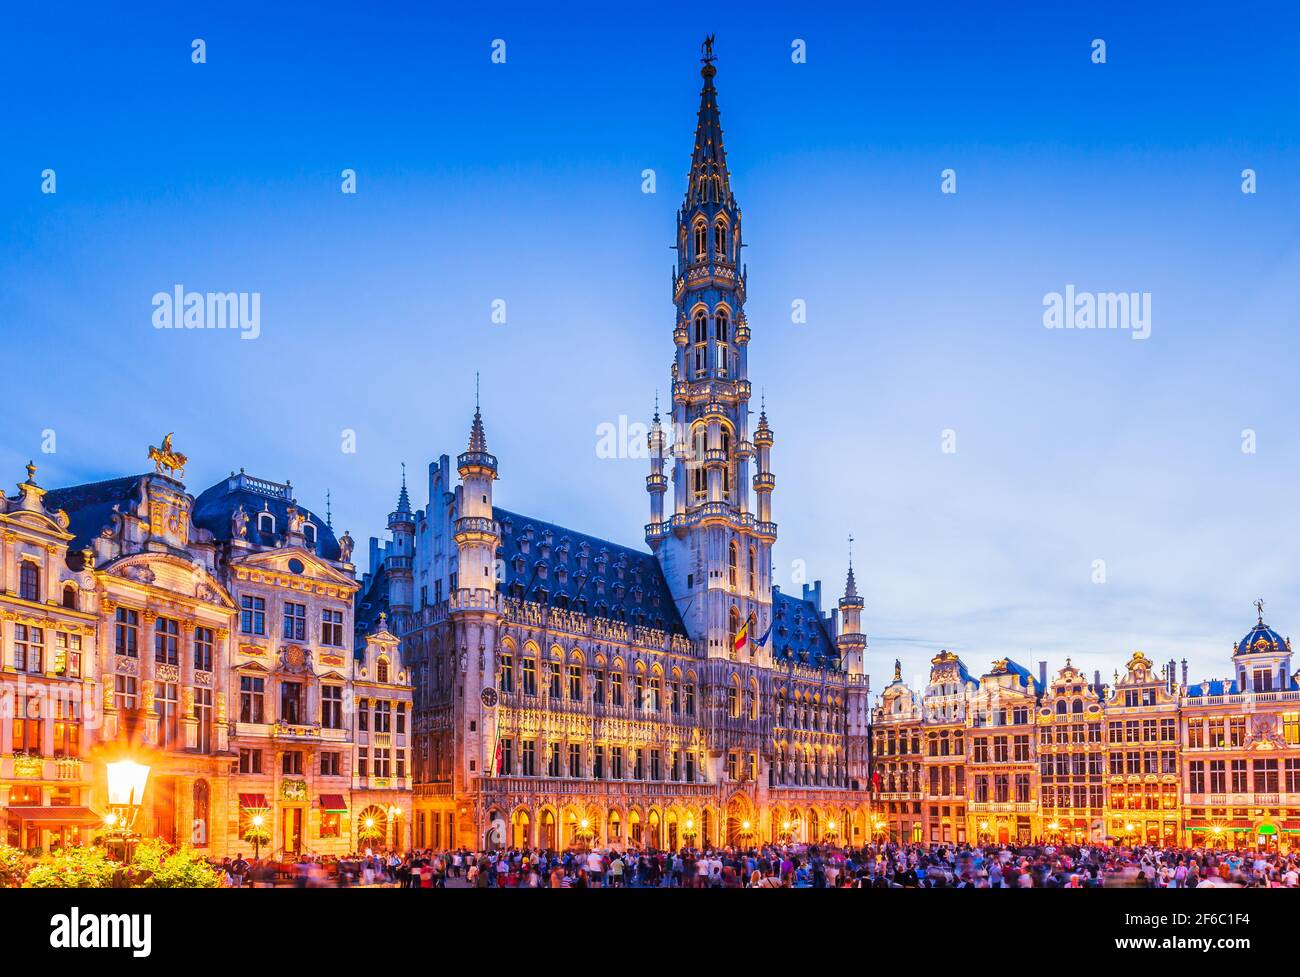 Brussels, Belgium. Grand Place. Market square surrounded by guild halls. Stock Photo